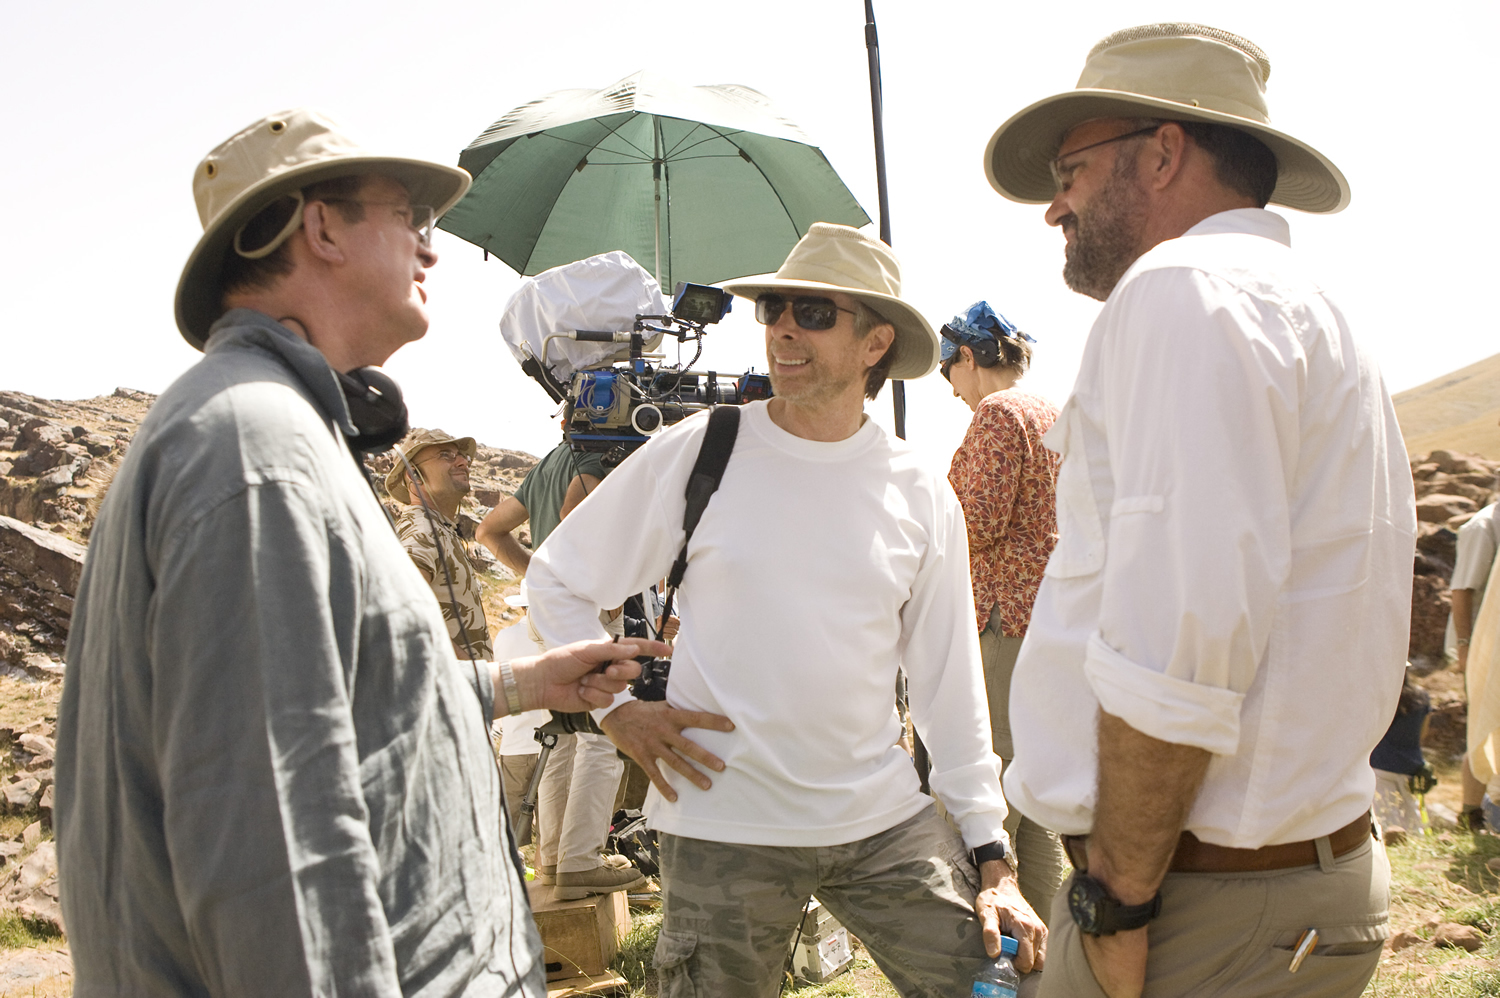 Jerry Bruckheimer and Mike Newell in Persijos princas: laiko smiltys (2010)